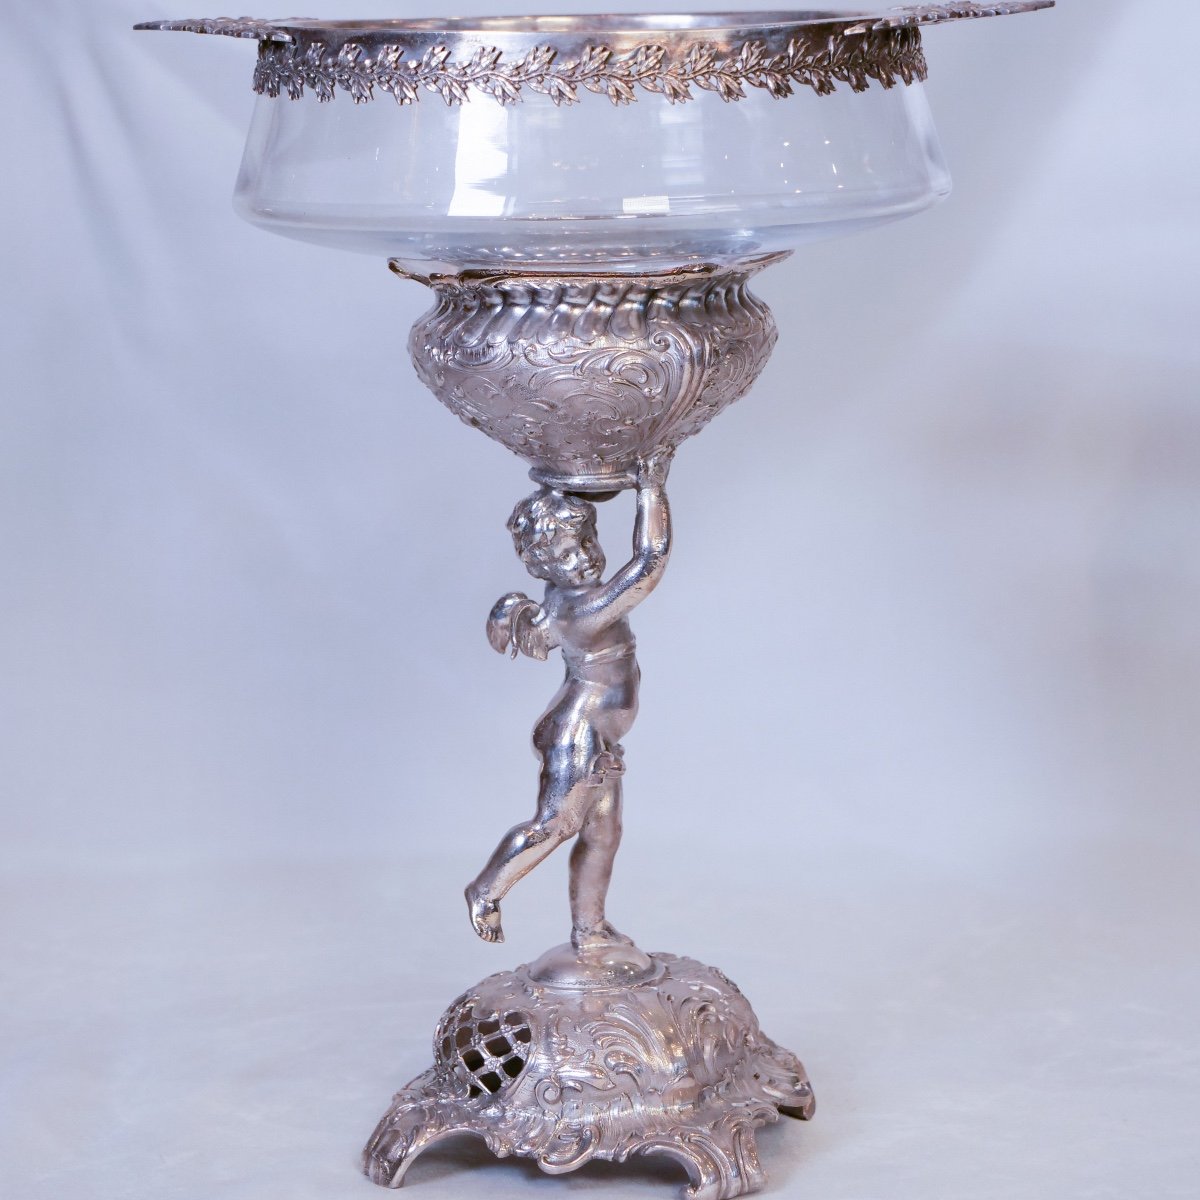 Centerpiece In Silver Plated Metal And Crystal With Bearing Cherub Angel